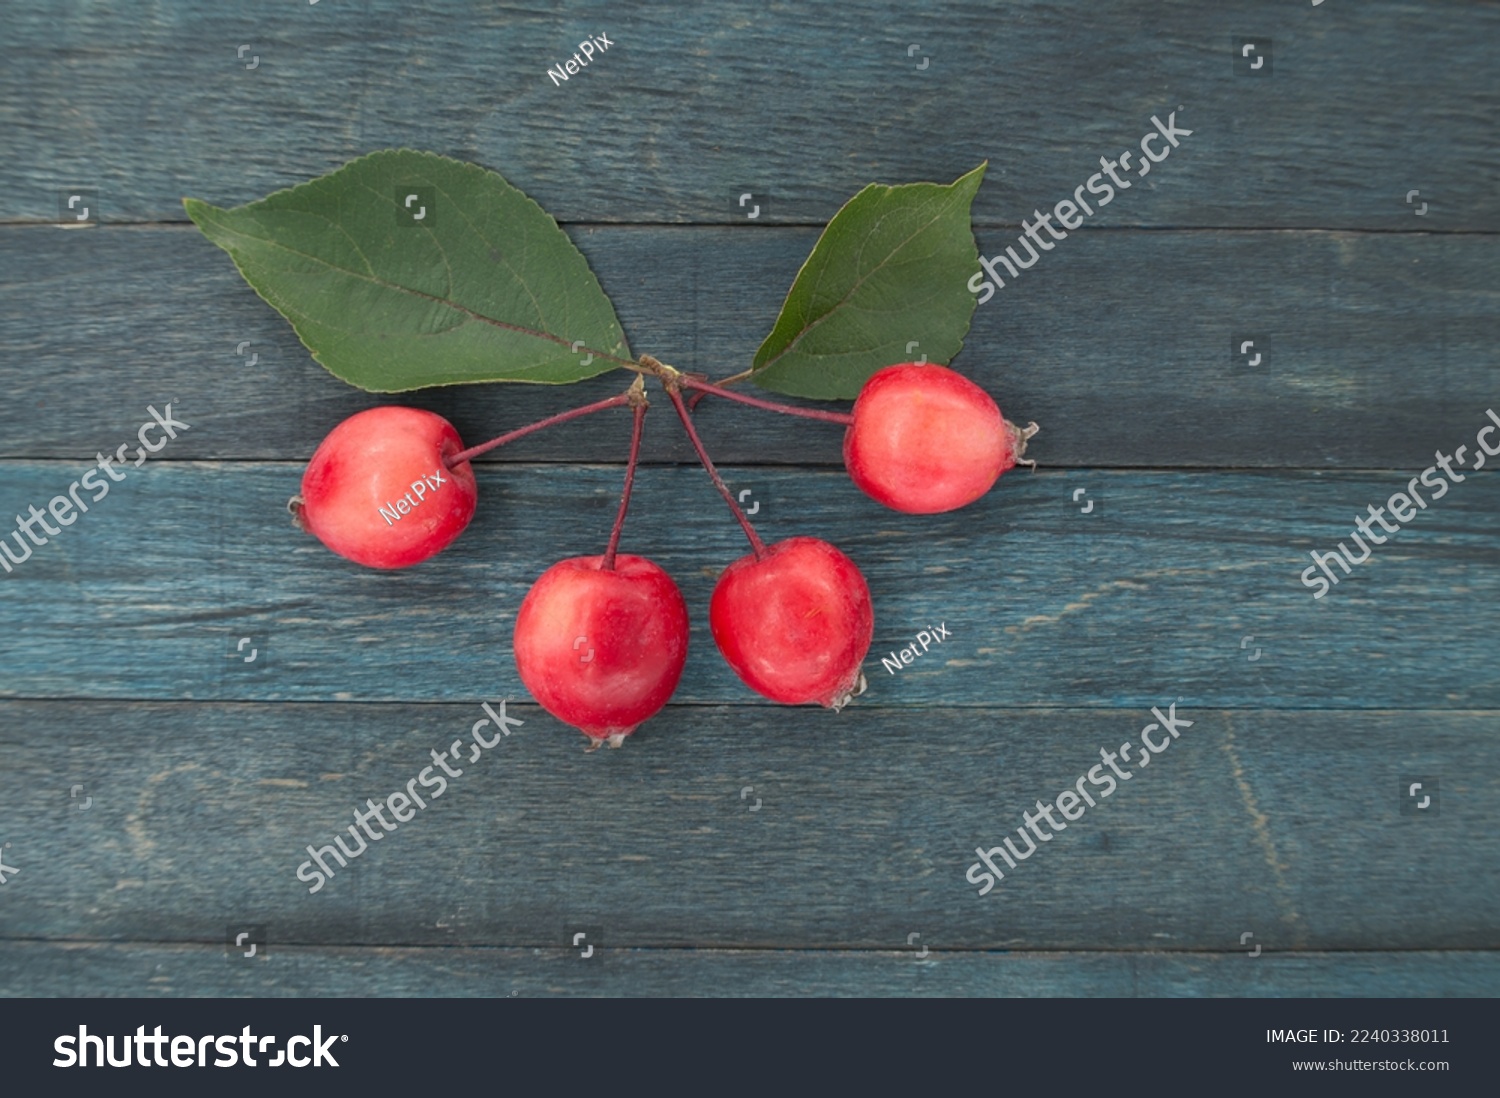 Crabapple or Siberian crab apple (Malus baccata) on blue wooden vintage background, top view with copy space #2240338011